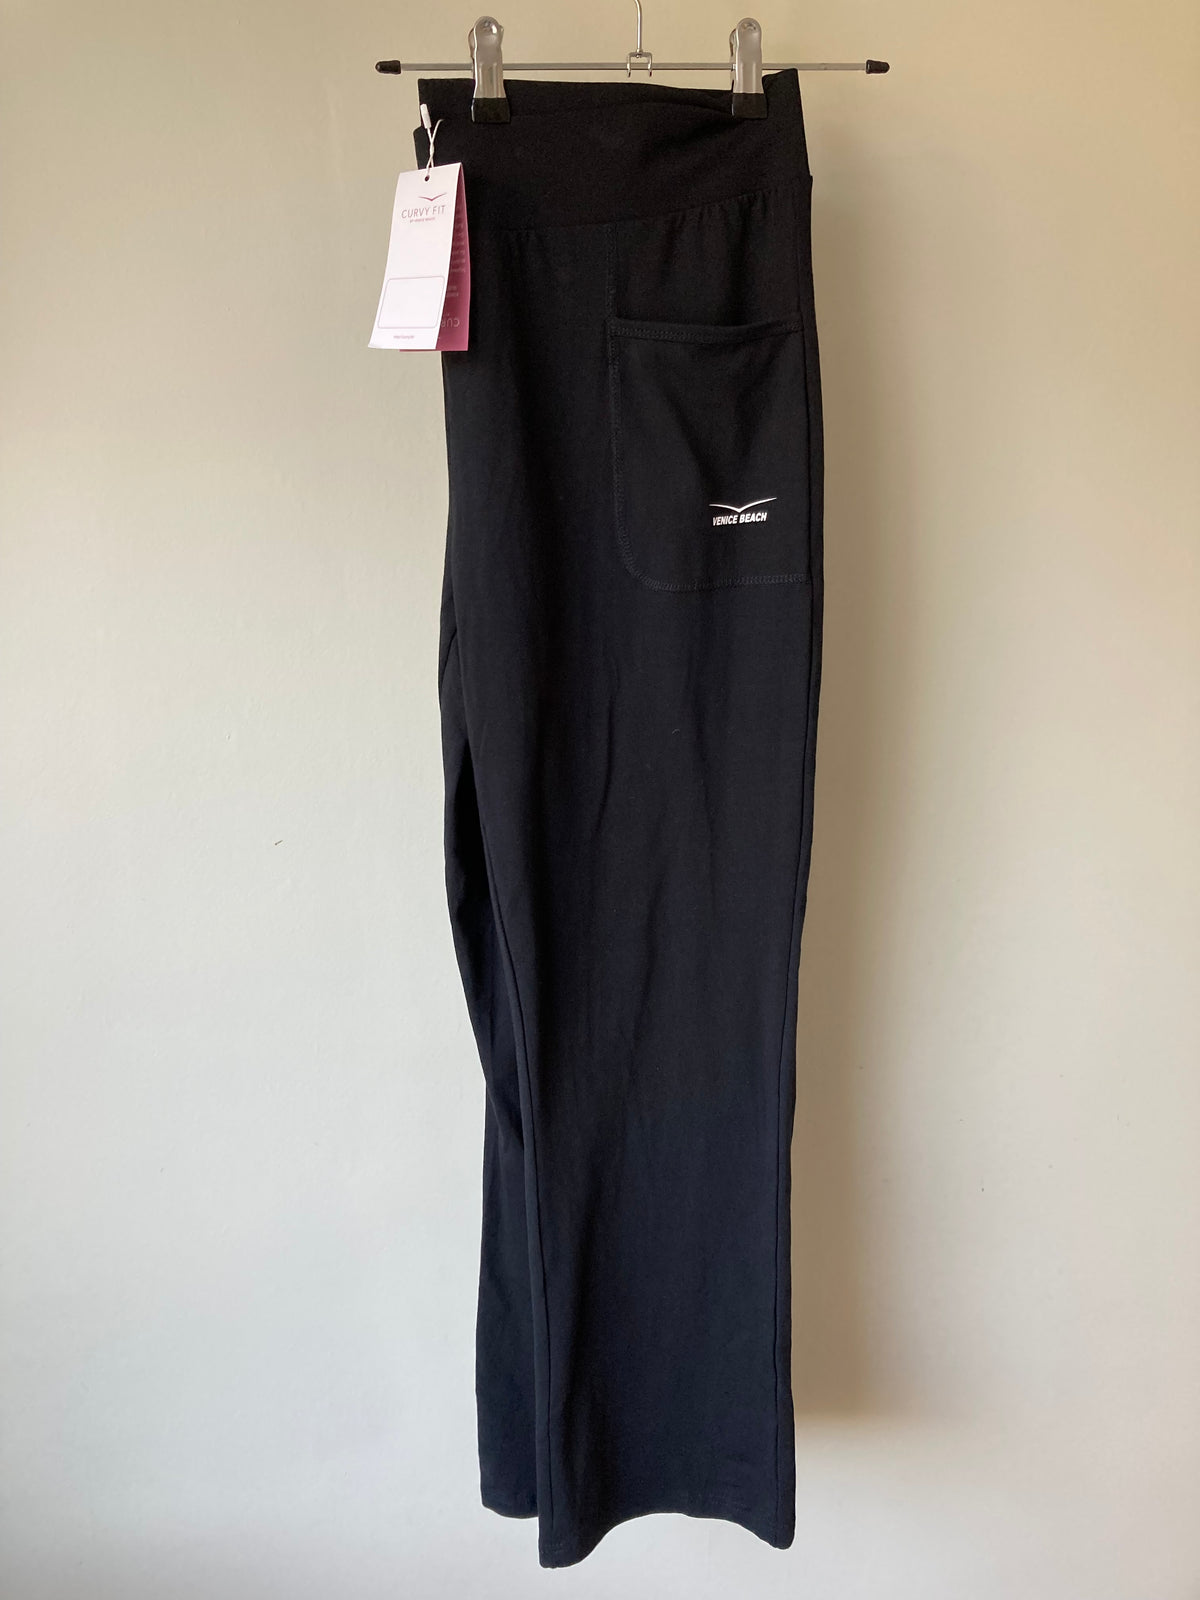 Black curve trousers by VENICE BEACH - Size 20